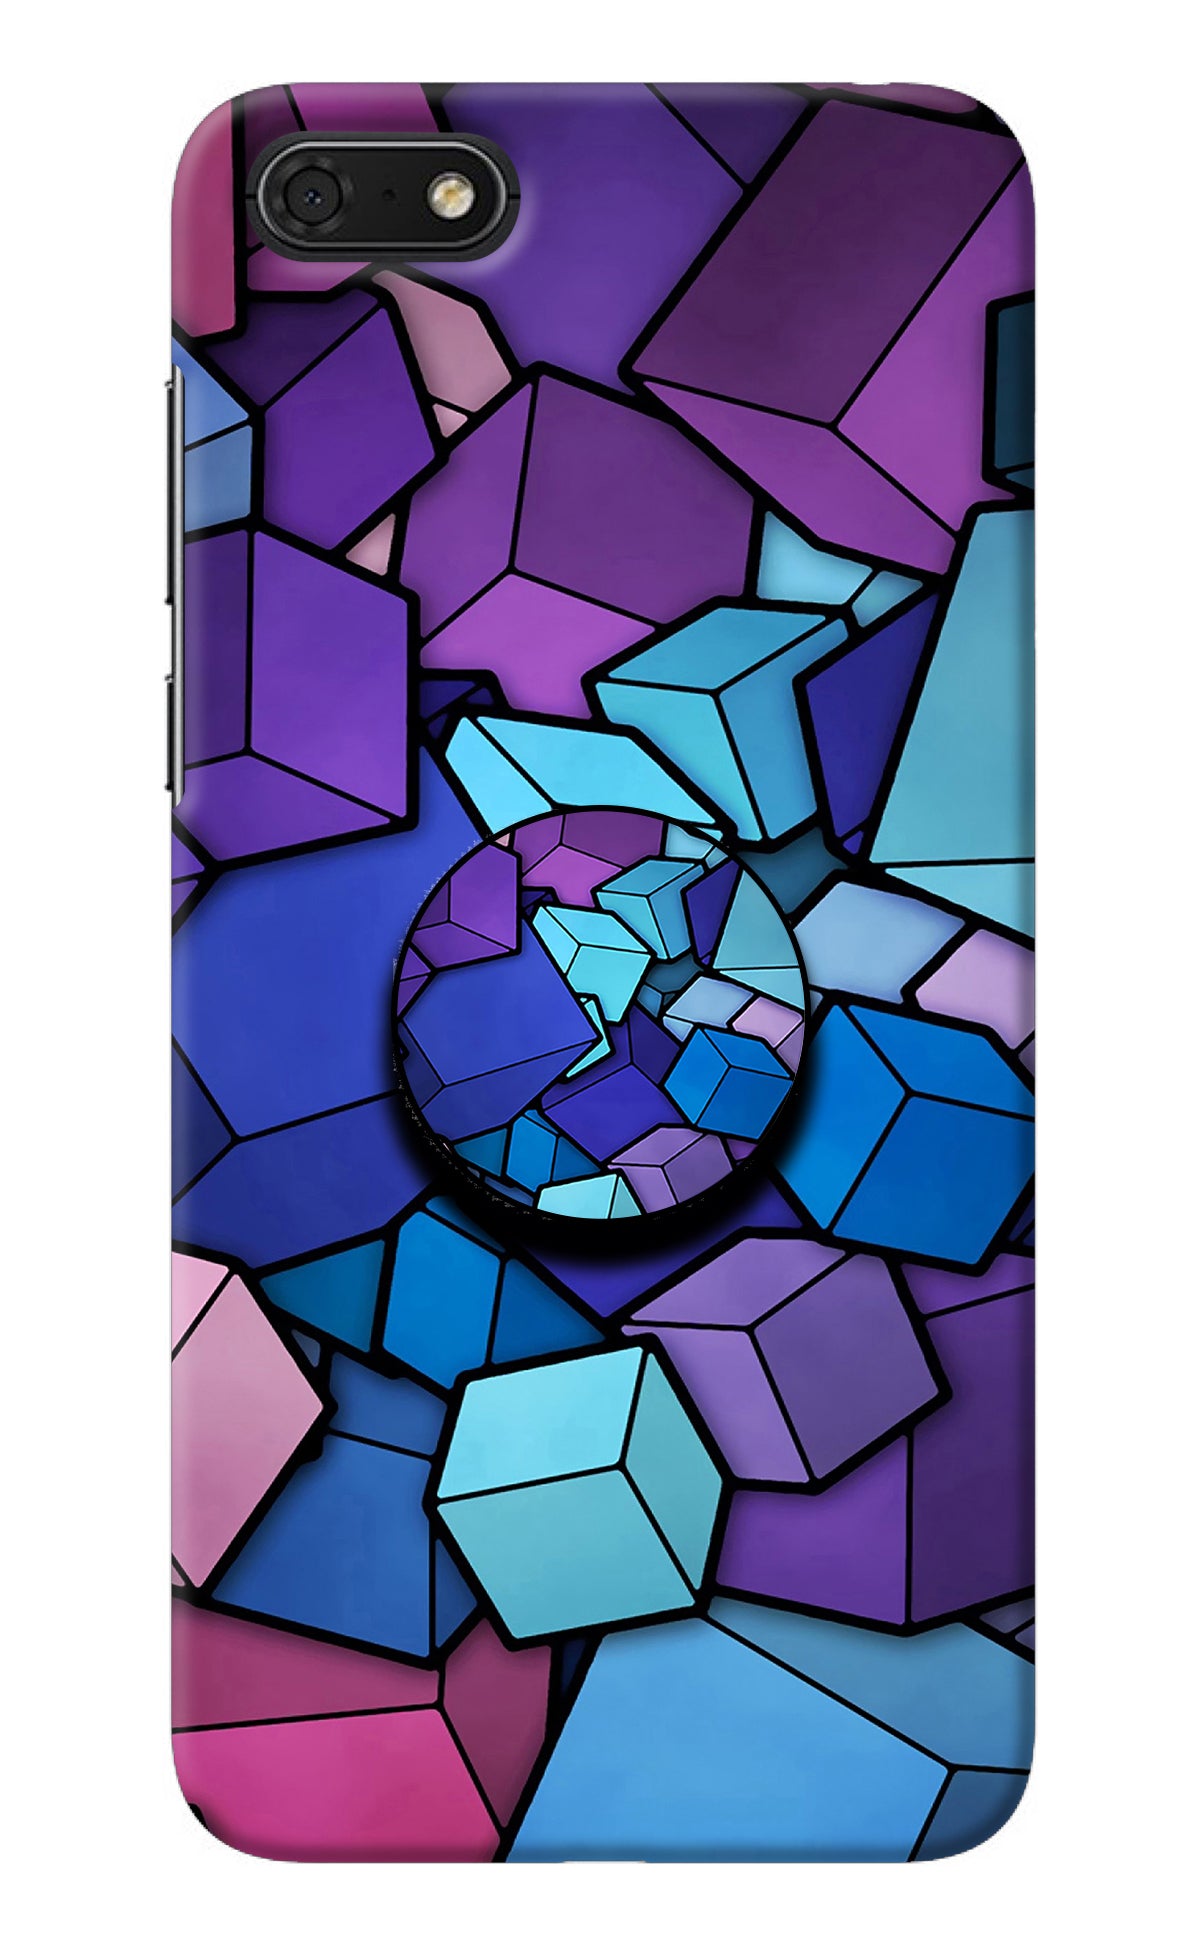 Cubic Abstract Honor 7S Pop Case